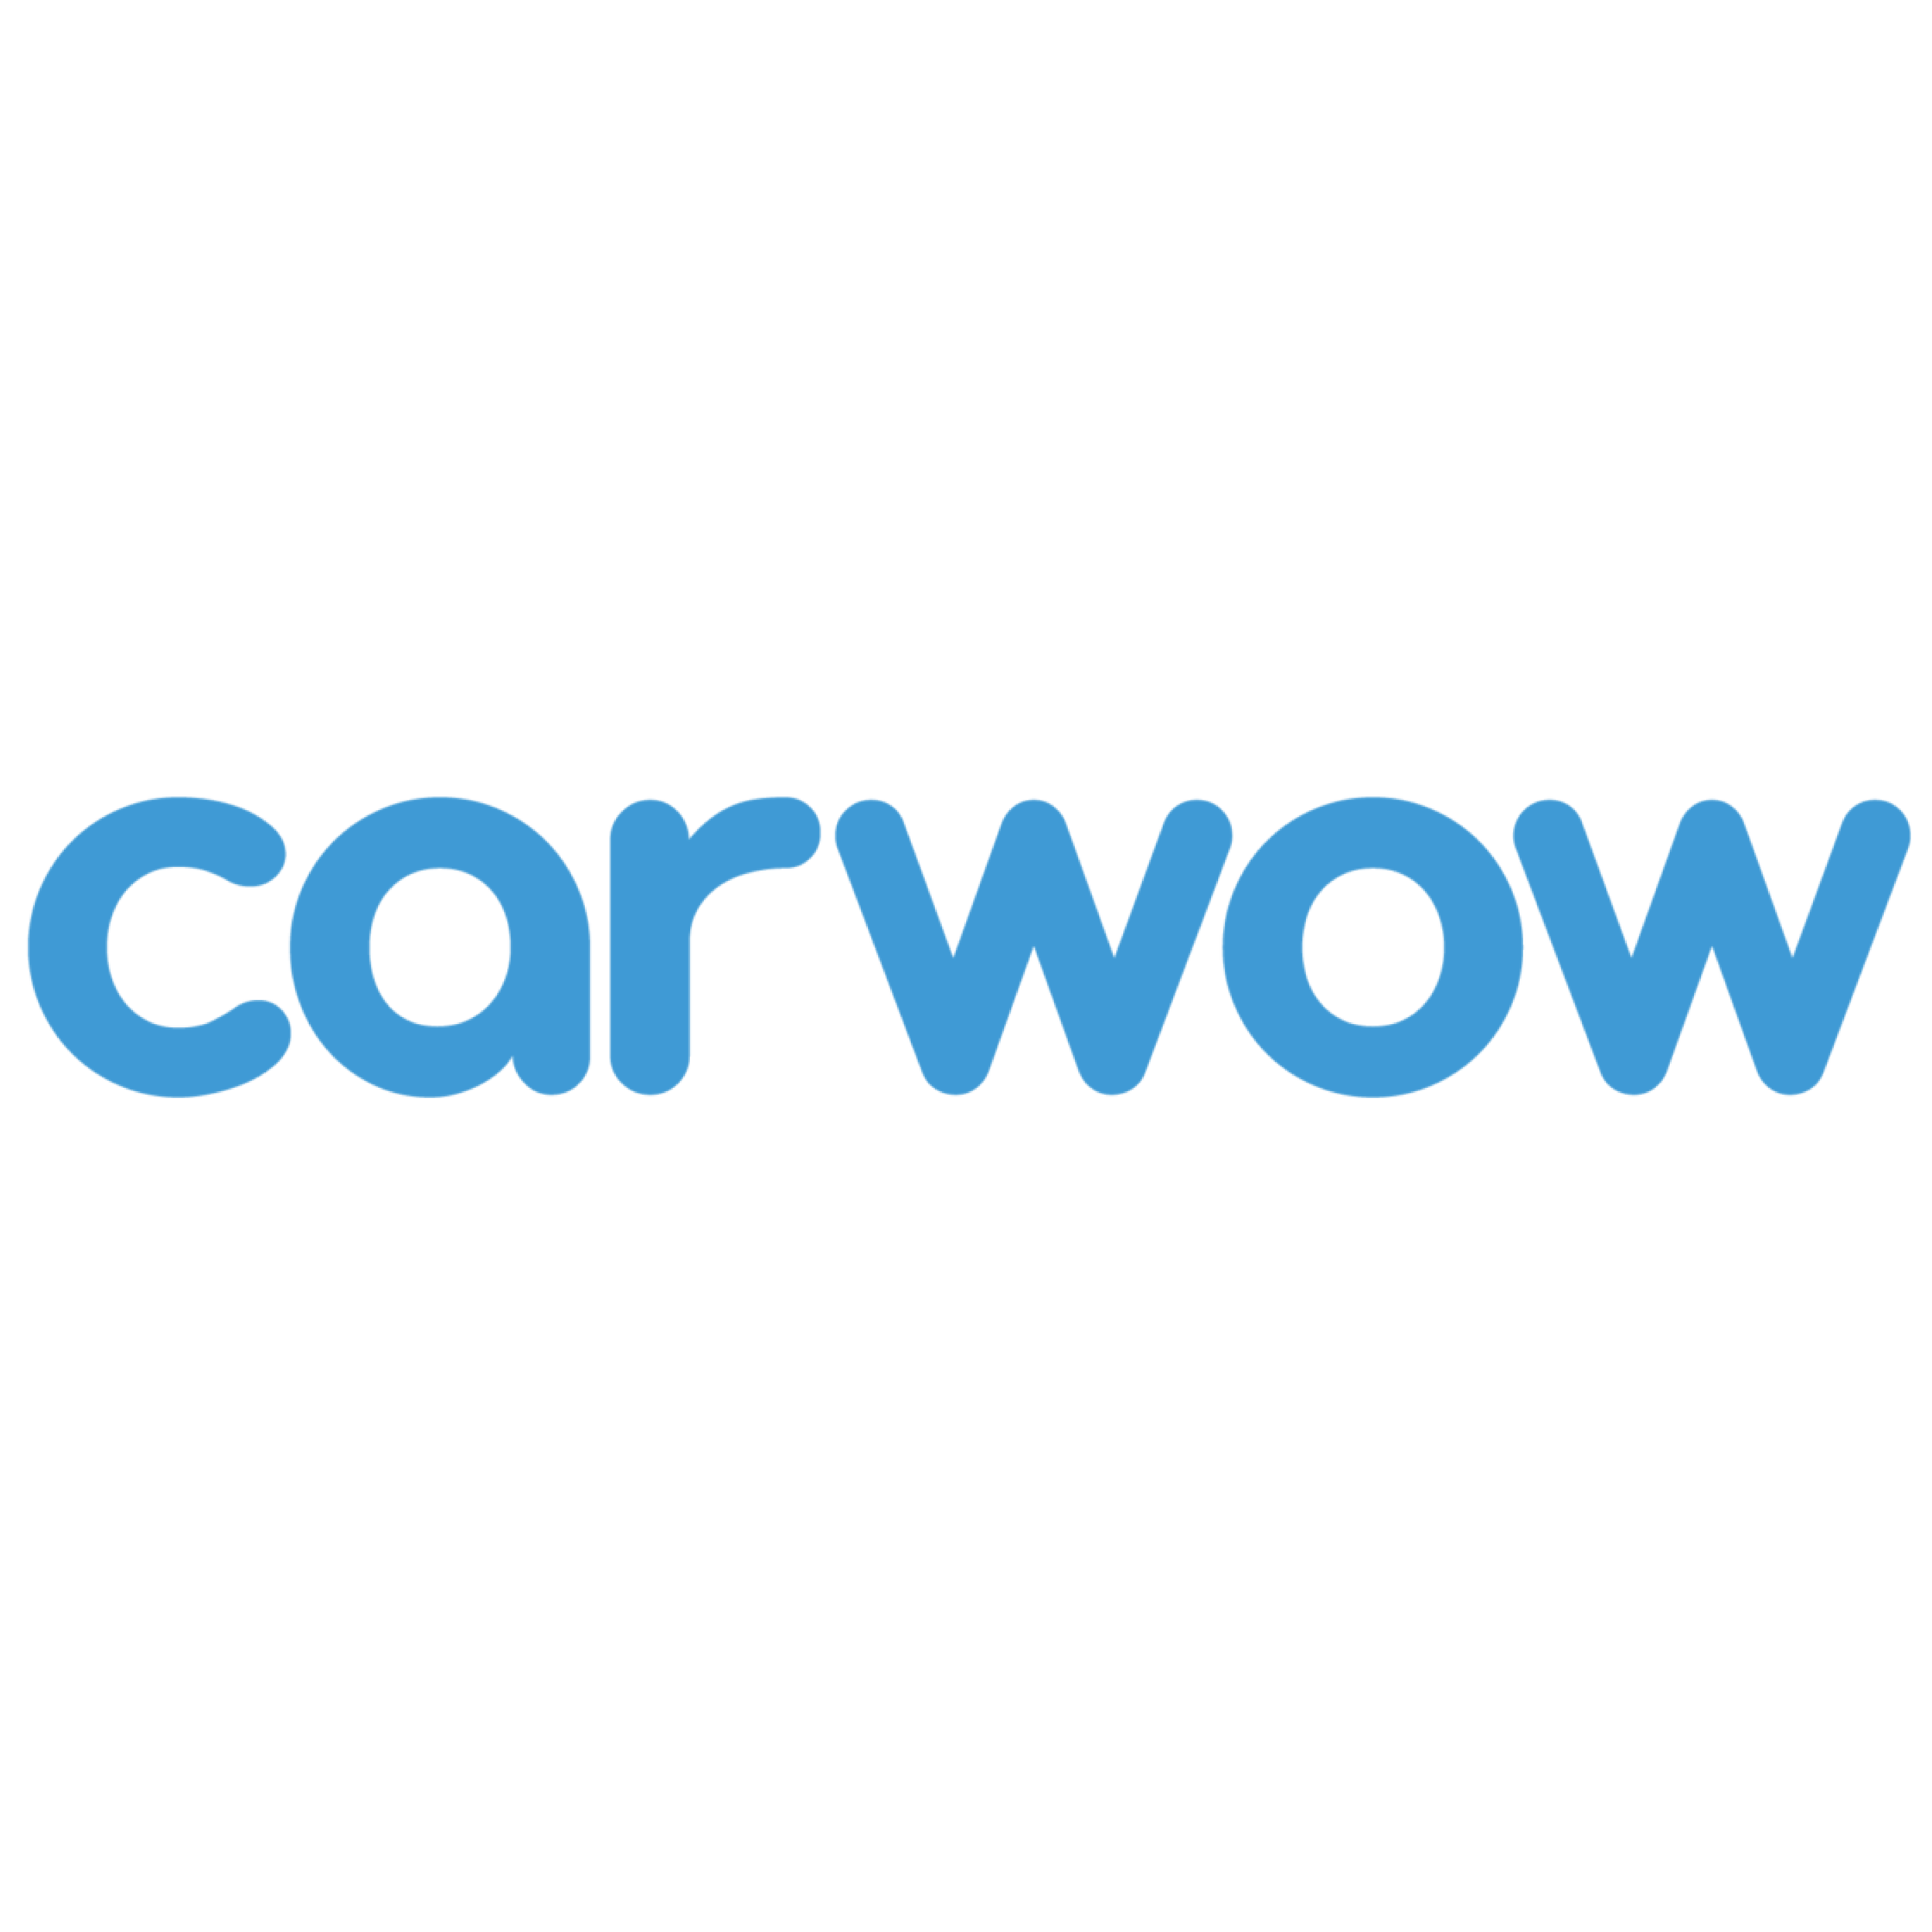 CARWOW-01.png